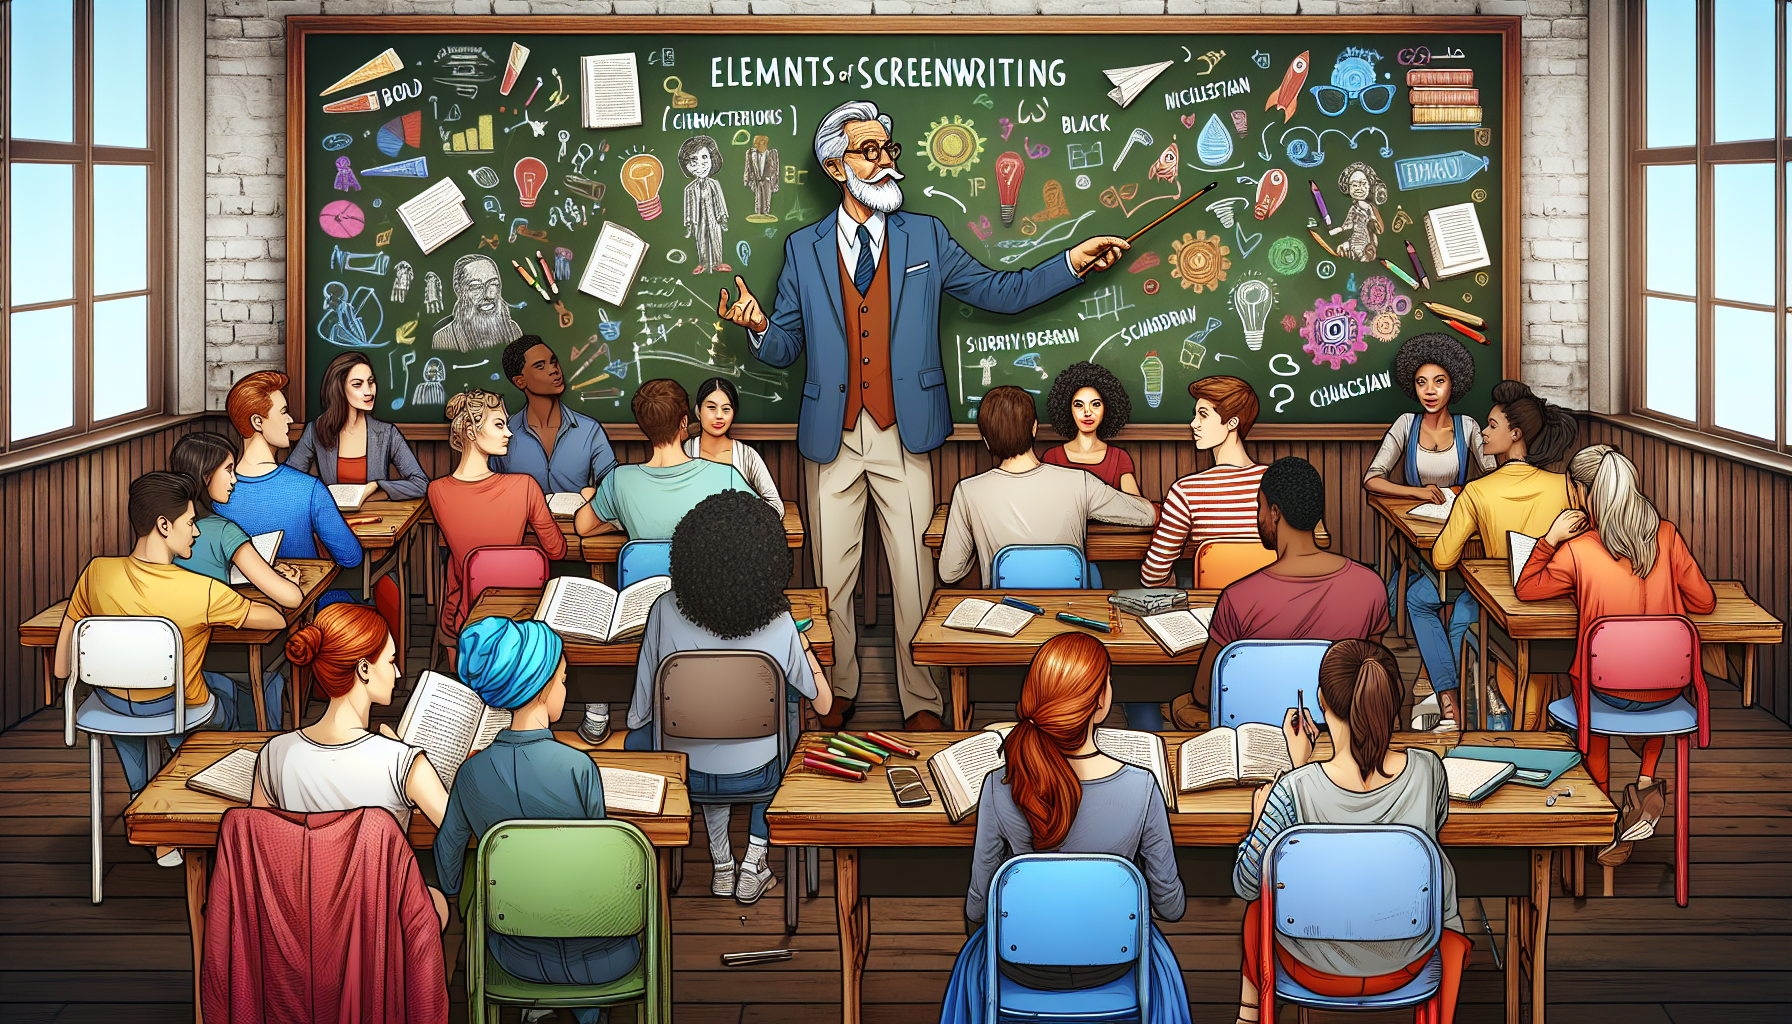 An imaginative classroom setting with diverse students of different ethnicities, sitting at antique wooden desks, deeply engaged in learning as an elderly, distinguished professor, animatedly teaches screenwriting essentials using a large, vintage blackboard filled with colorful notes and diagrams about character development and plot structure.